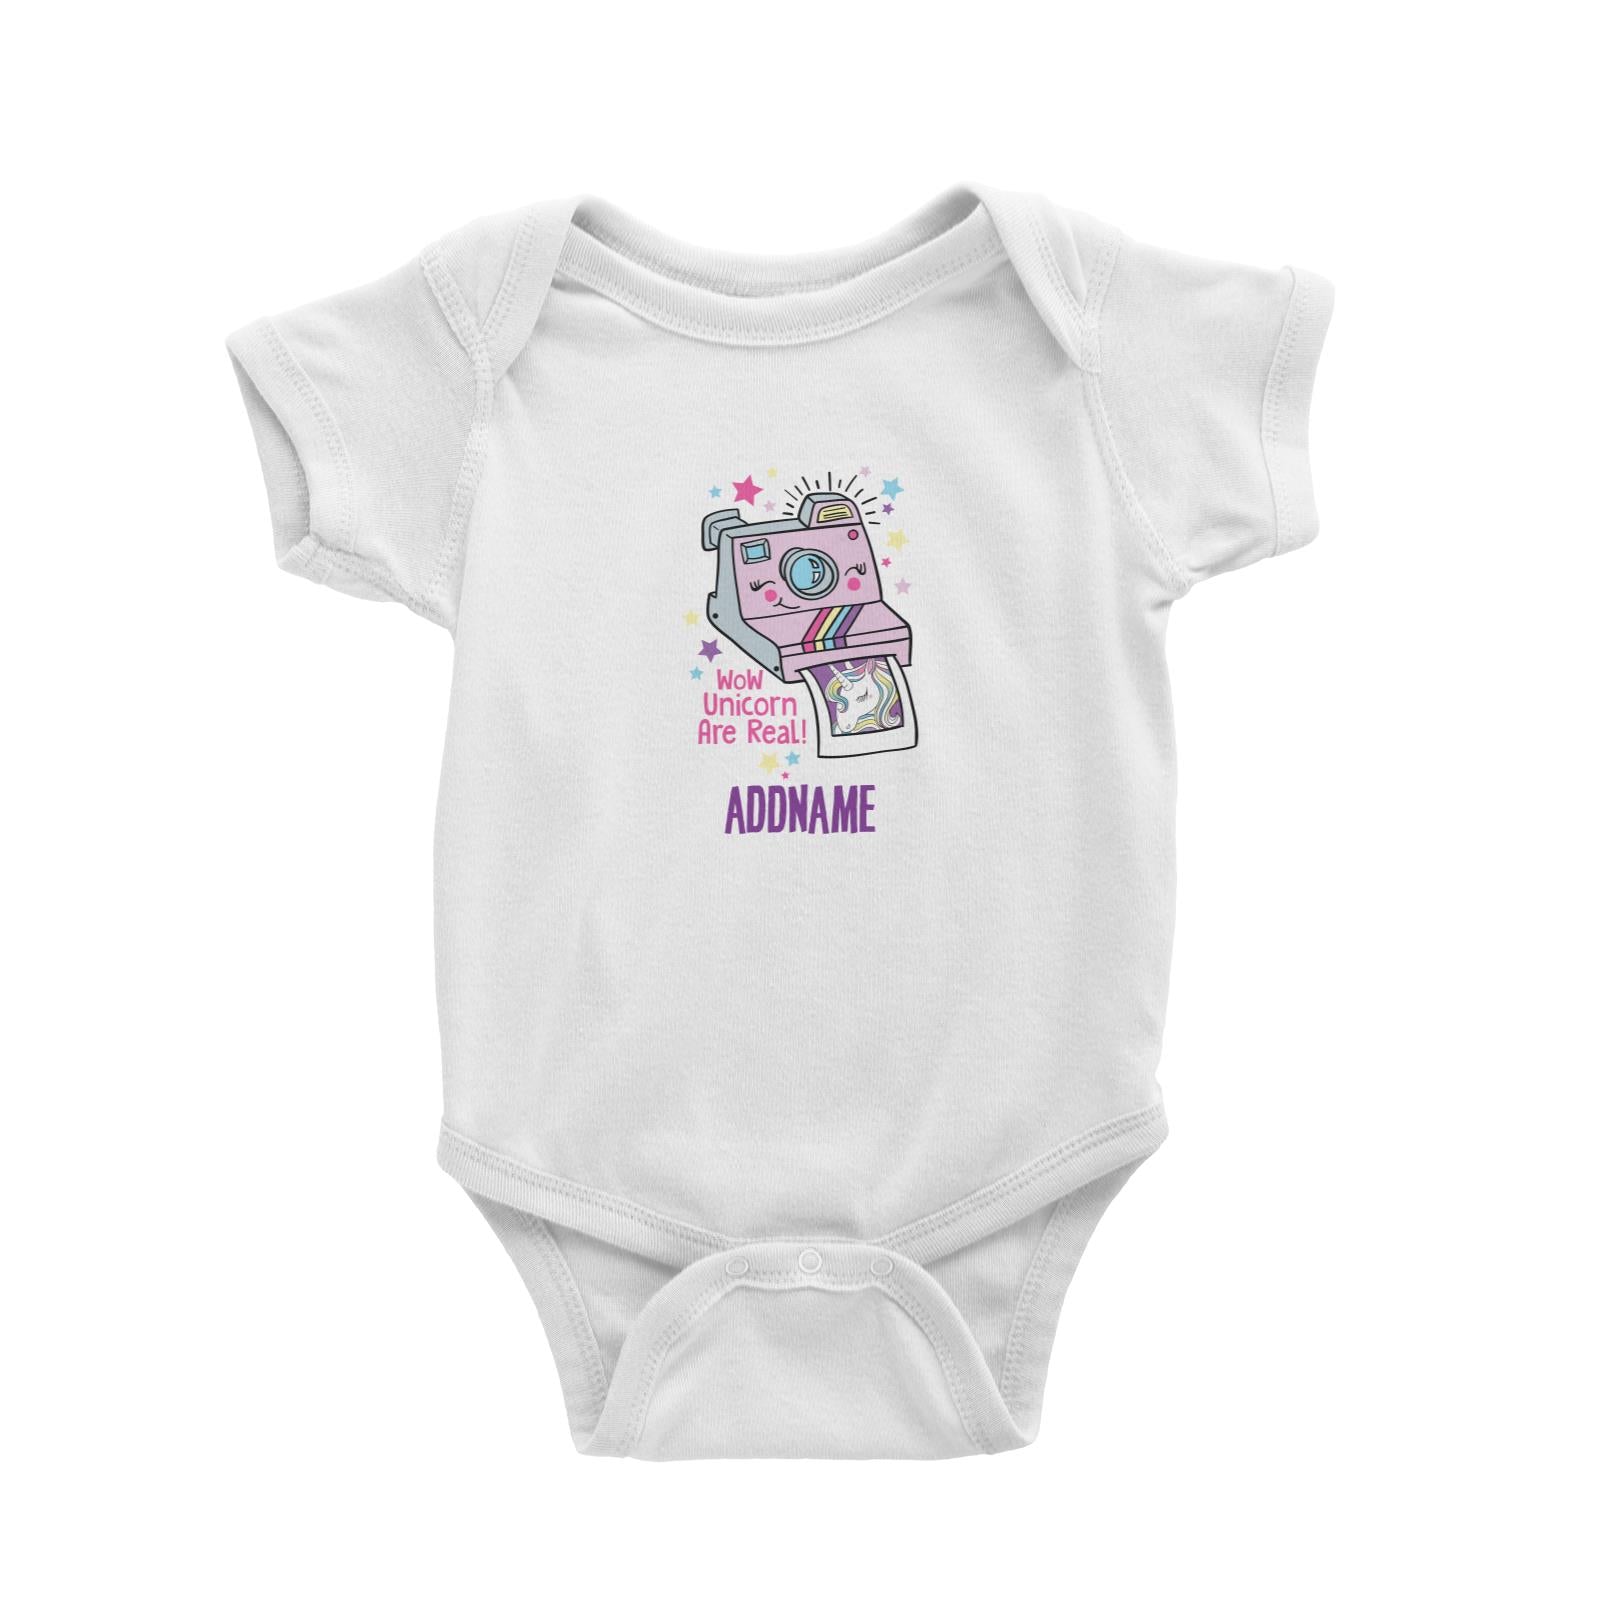 Cool Vibrant Series Wow Unicorn Are Real Photo Addname Baby Romper [SALE]